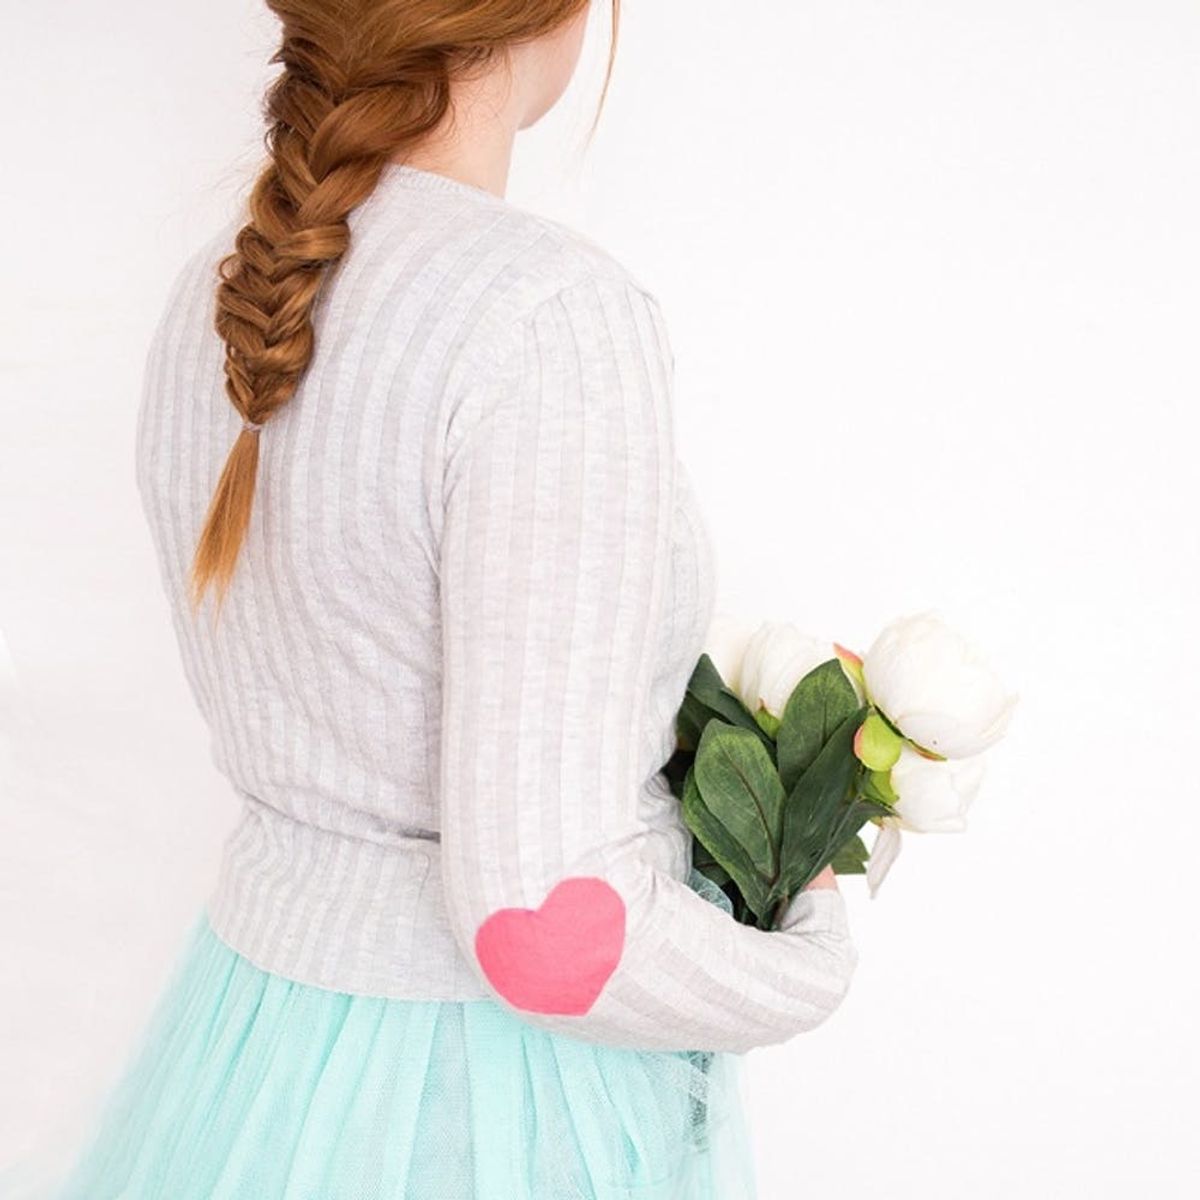 DIY This Valentine’s Day Sweater in 5 Simple Steps